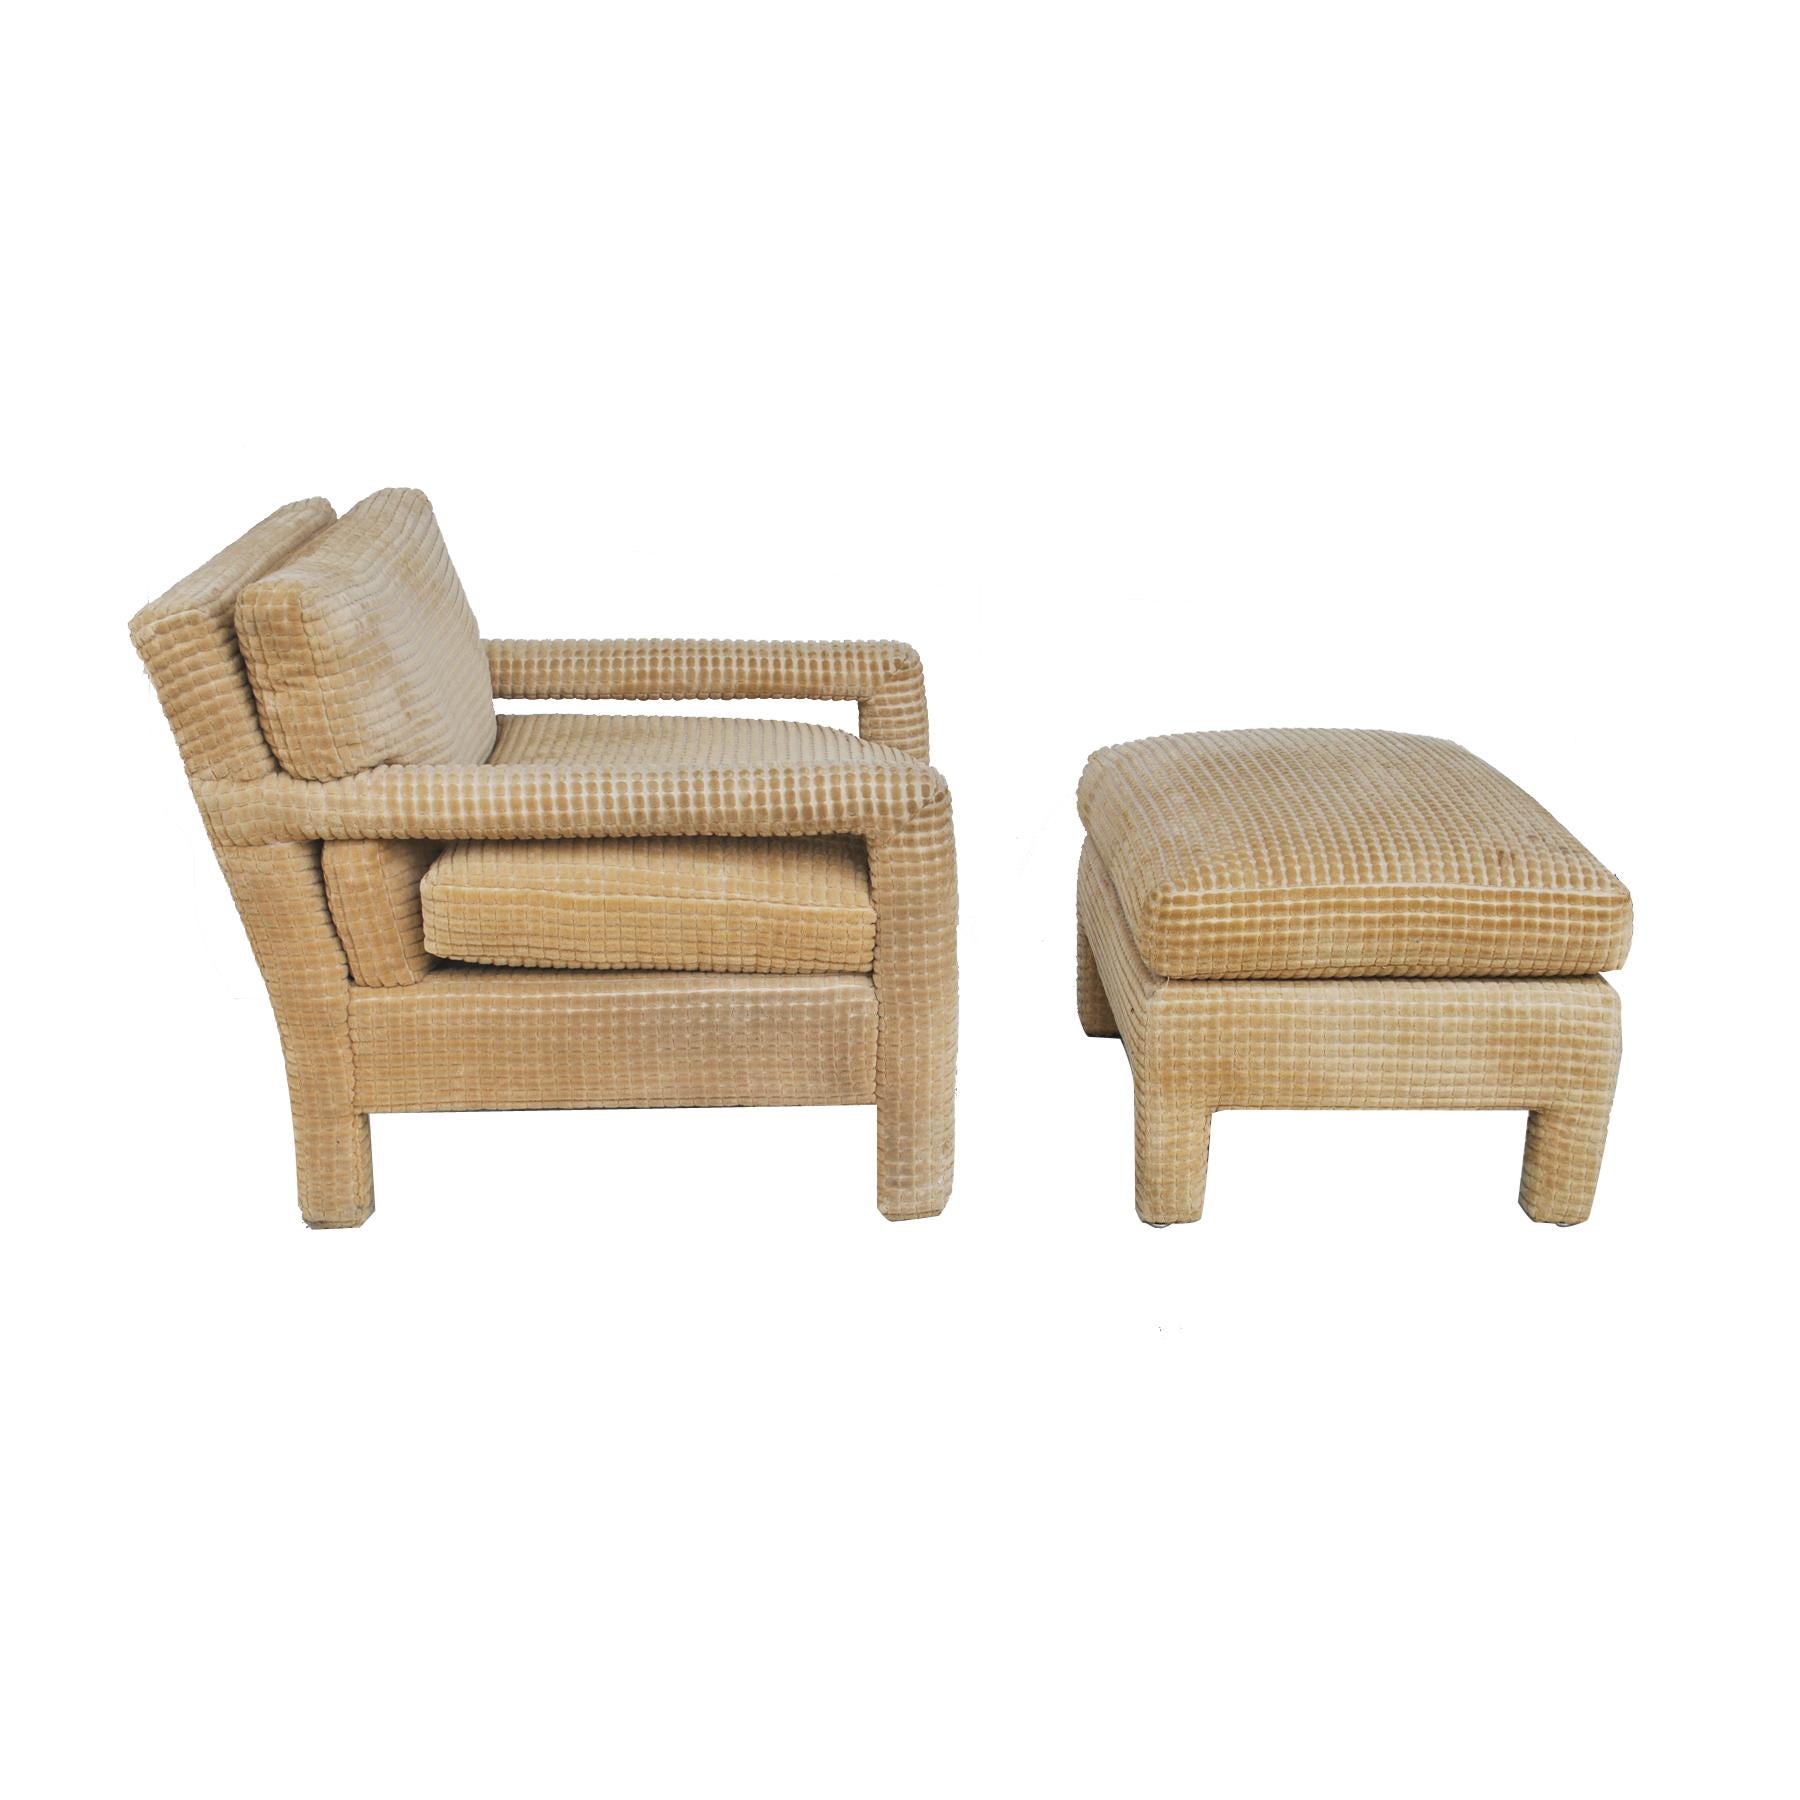 Mid-Century Modern Pair of Midcentury Lounge Chairs and Ottoman by John Mascheroni for Swaim